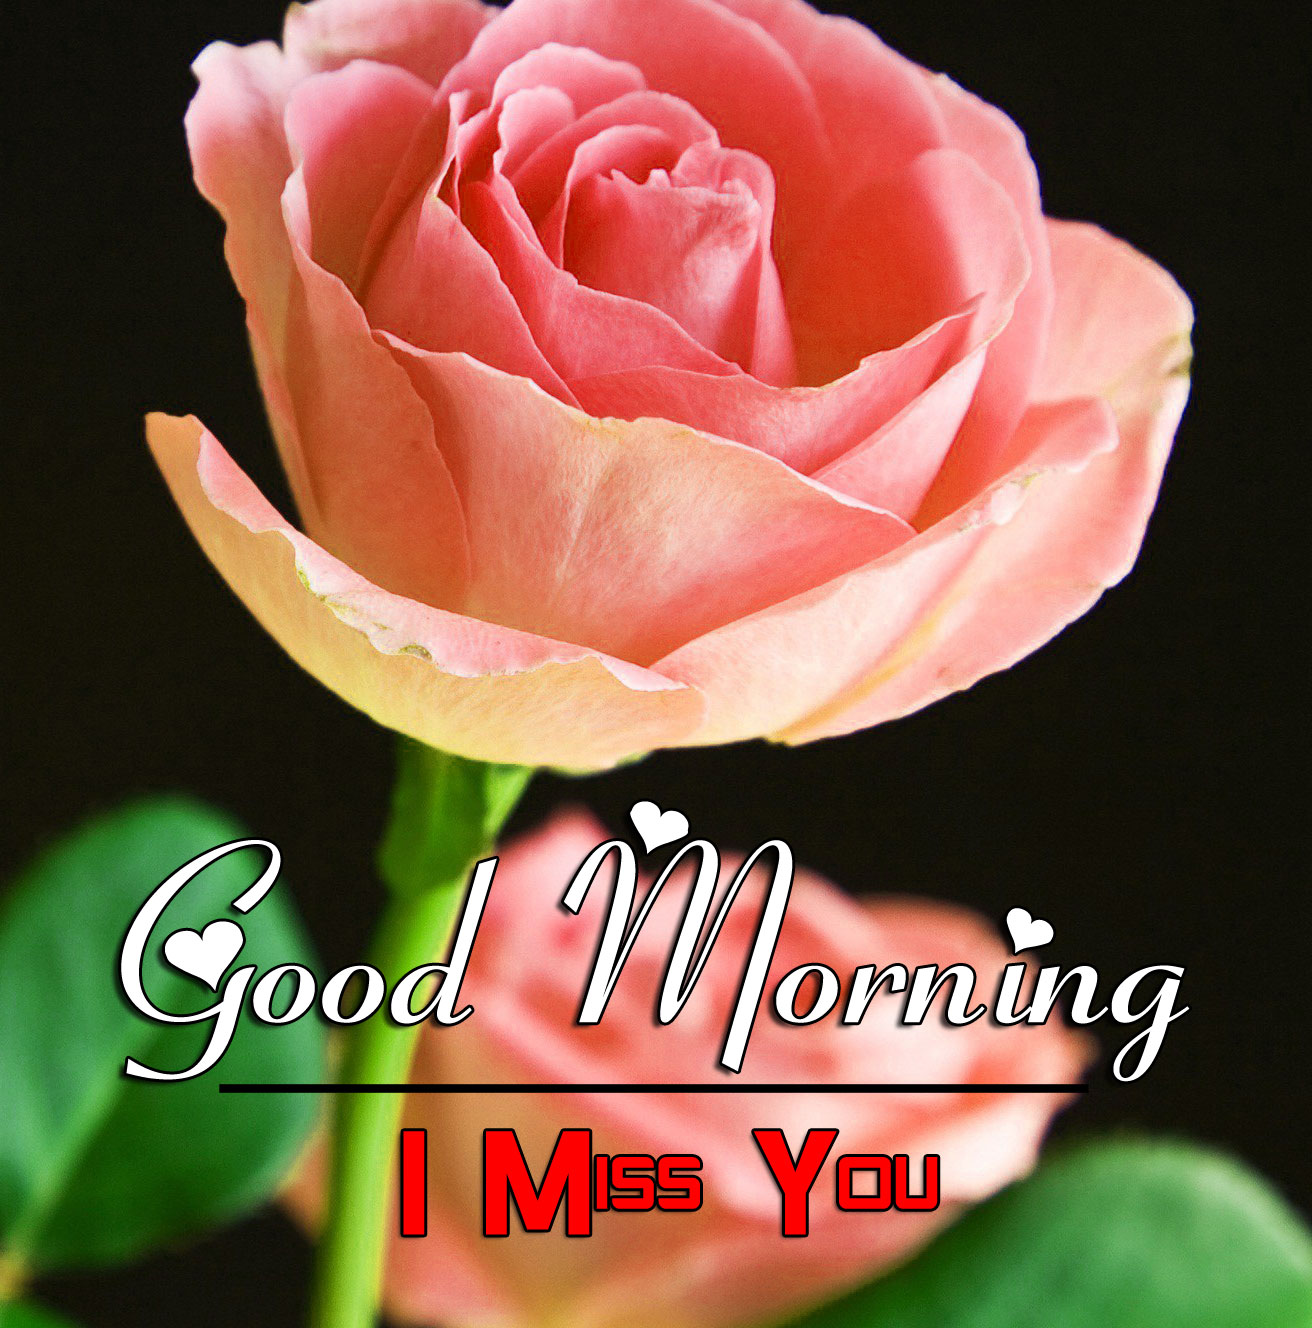 Good Morning Photo New Download